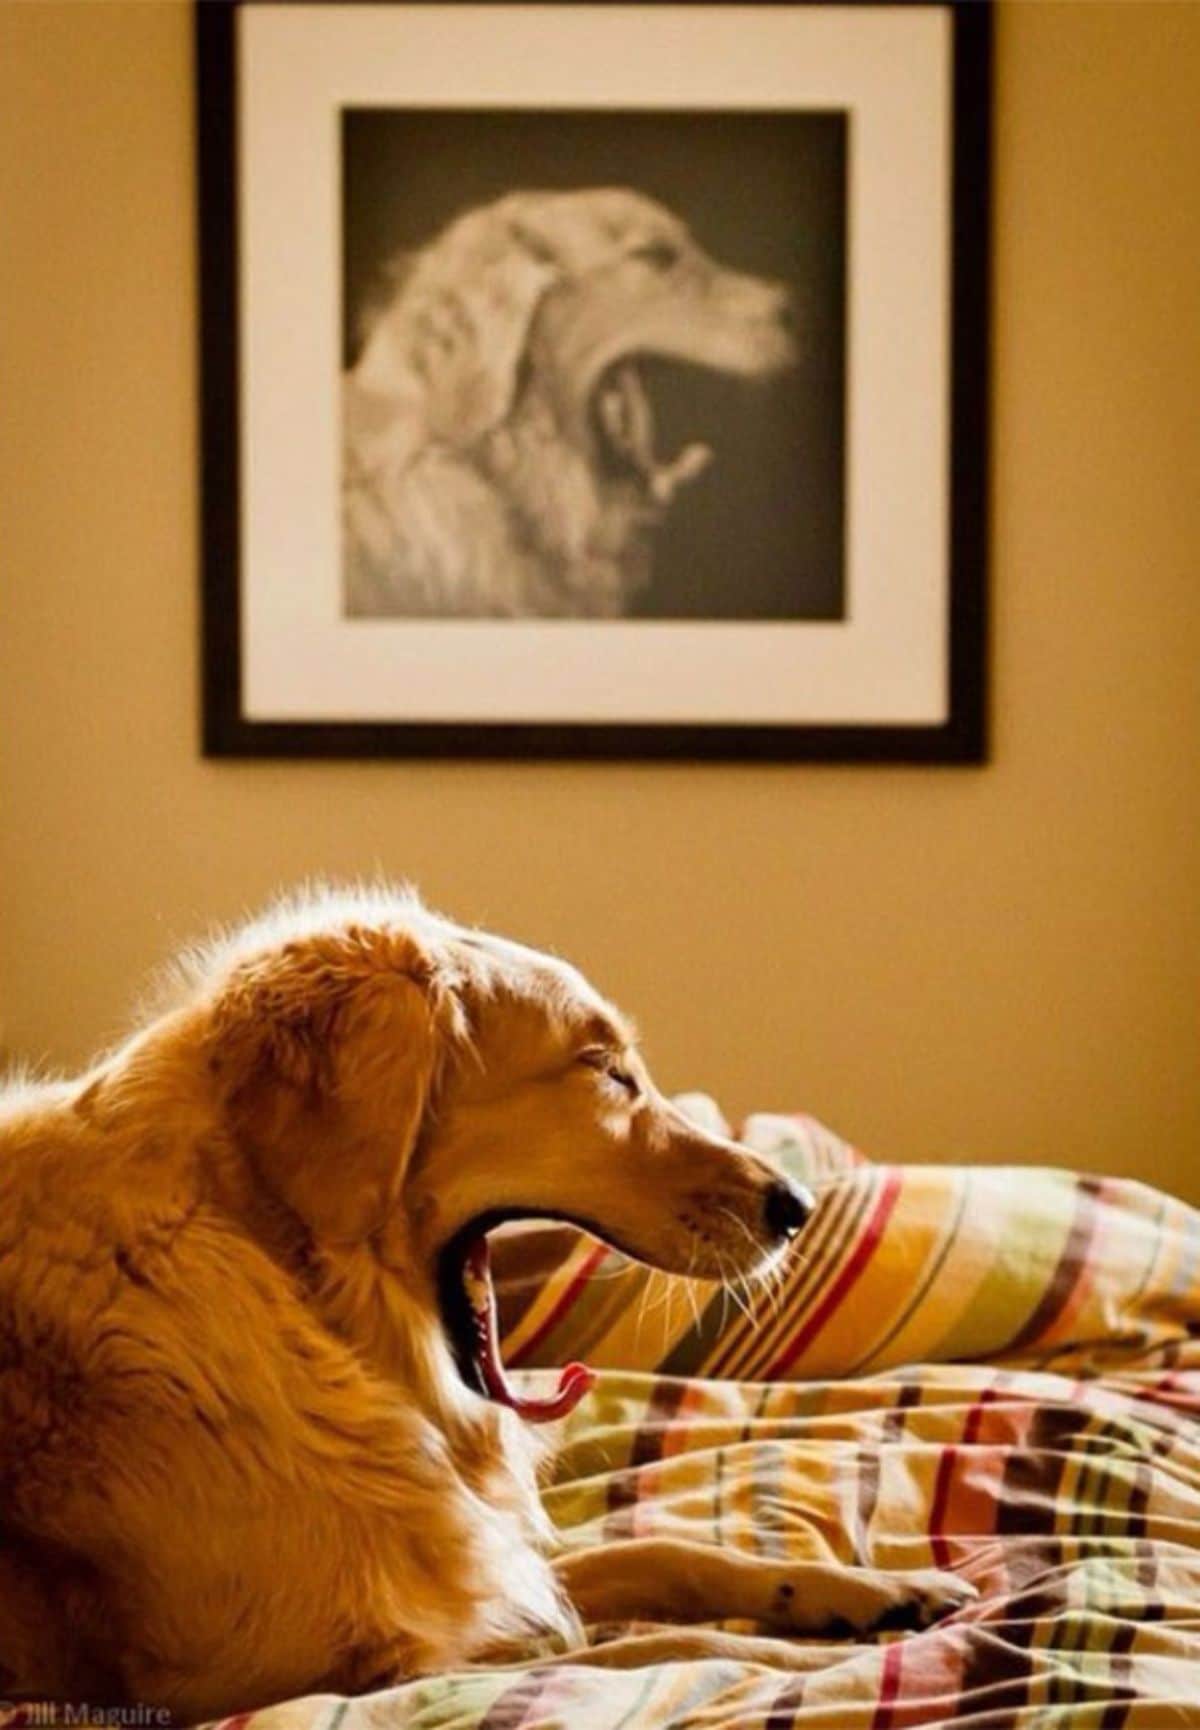 golden retriever on a bed yawning with the same epression on a golden retriever in a framed photo